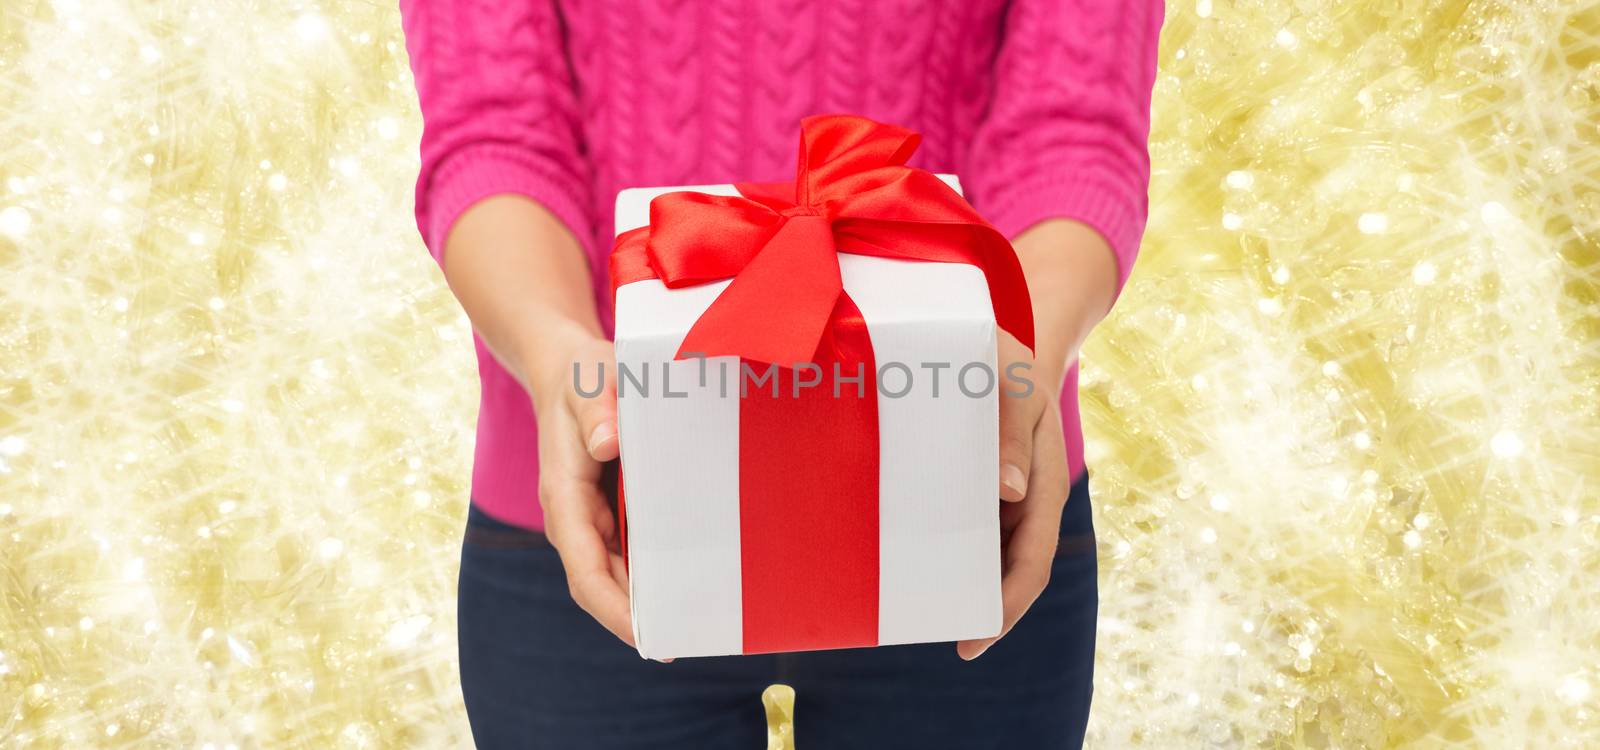 christmas, holidays and people concept - close up of woman in pink sweater holding gift box over yellow background